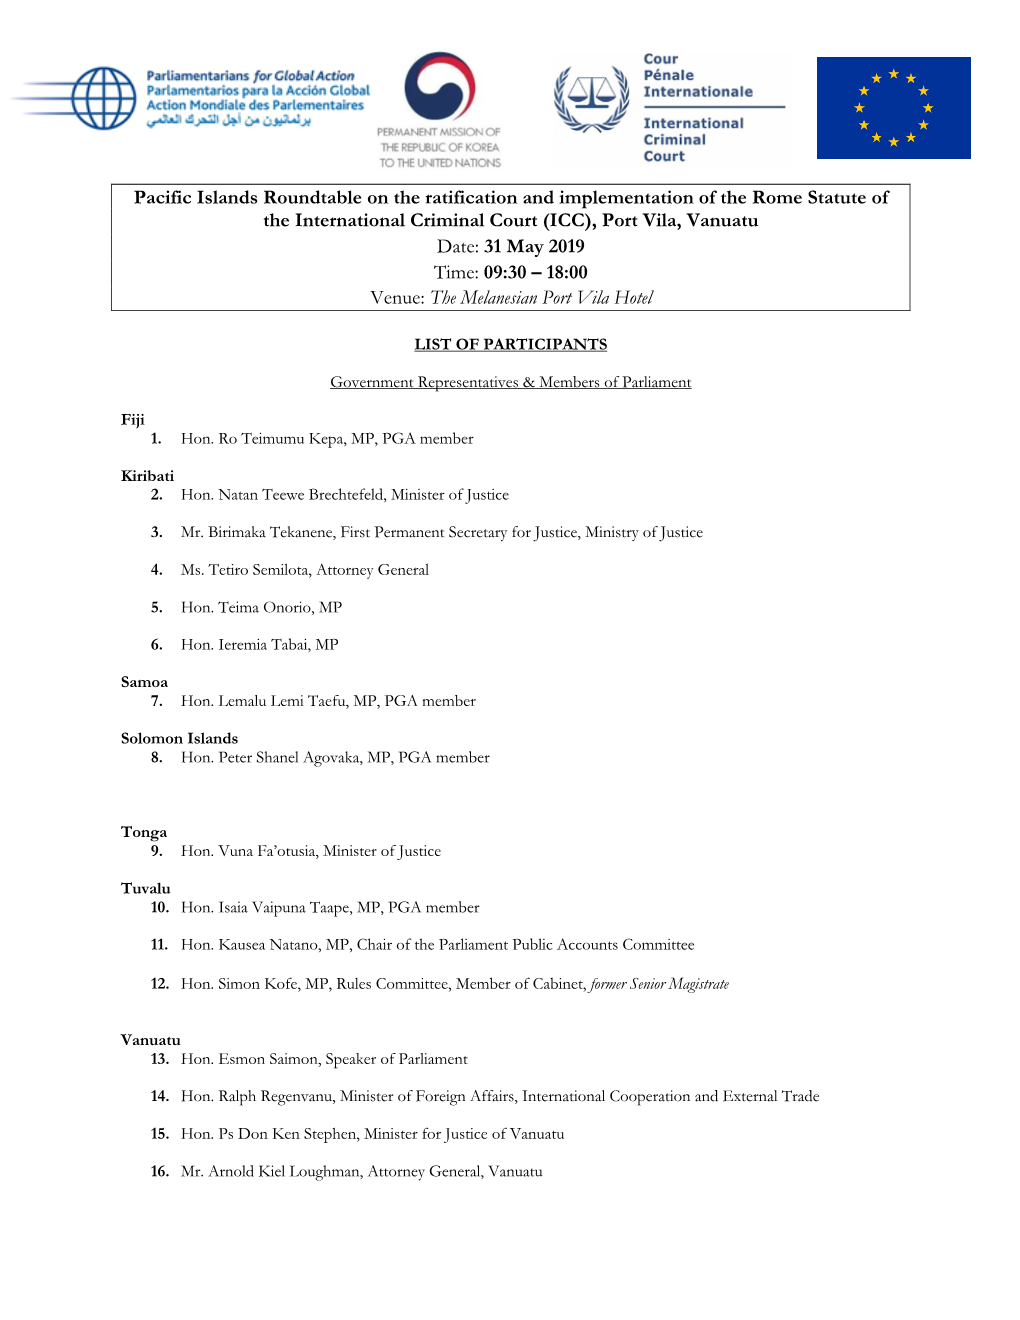 List of Participants: Pacific Islands Roundtable on the Ratification and Implementation of the Rome Statute of the International